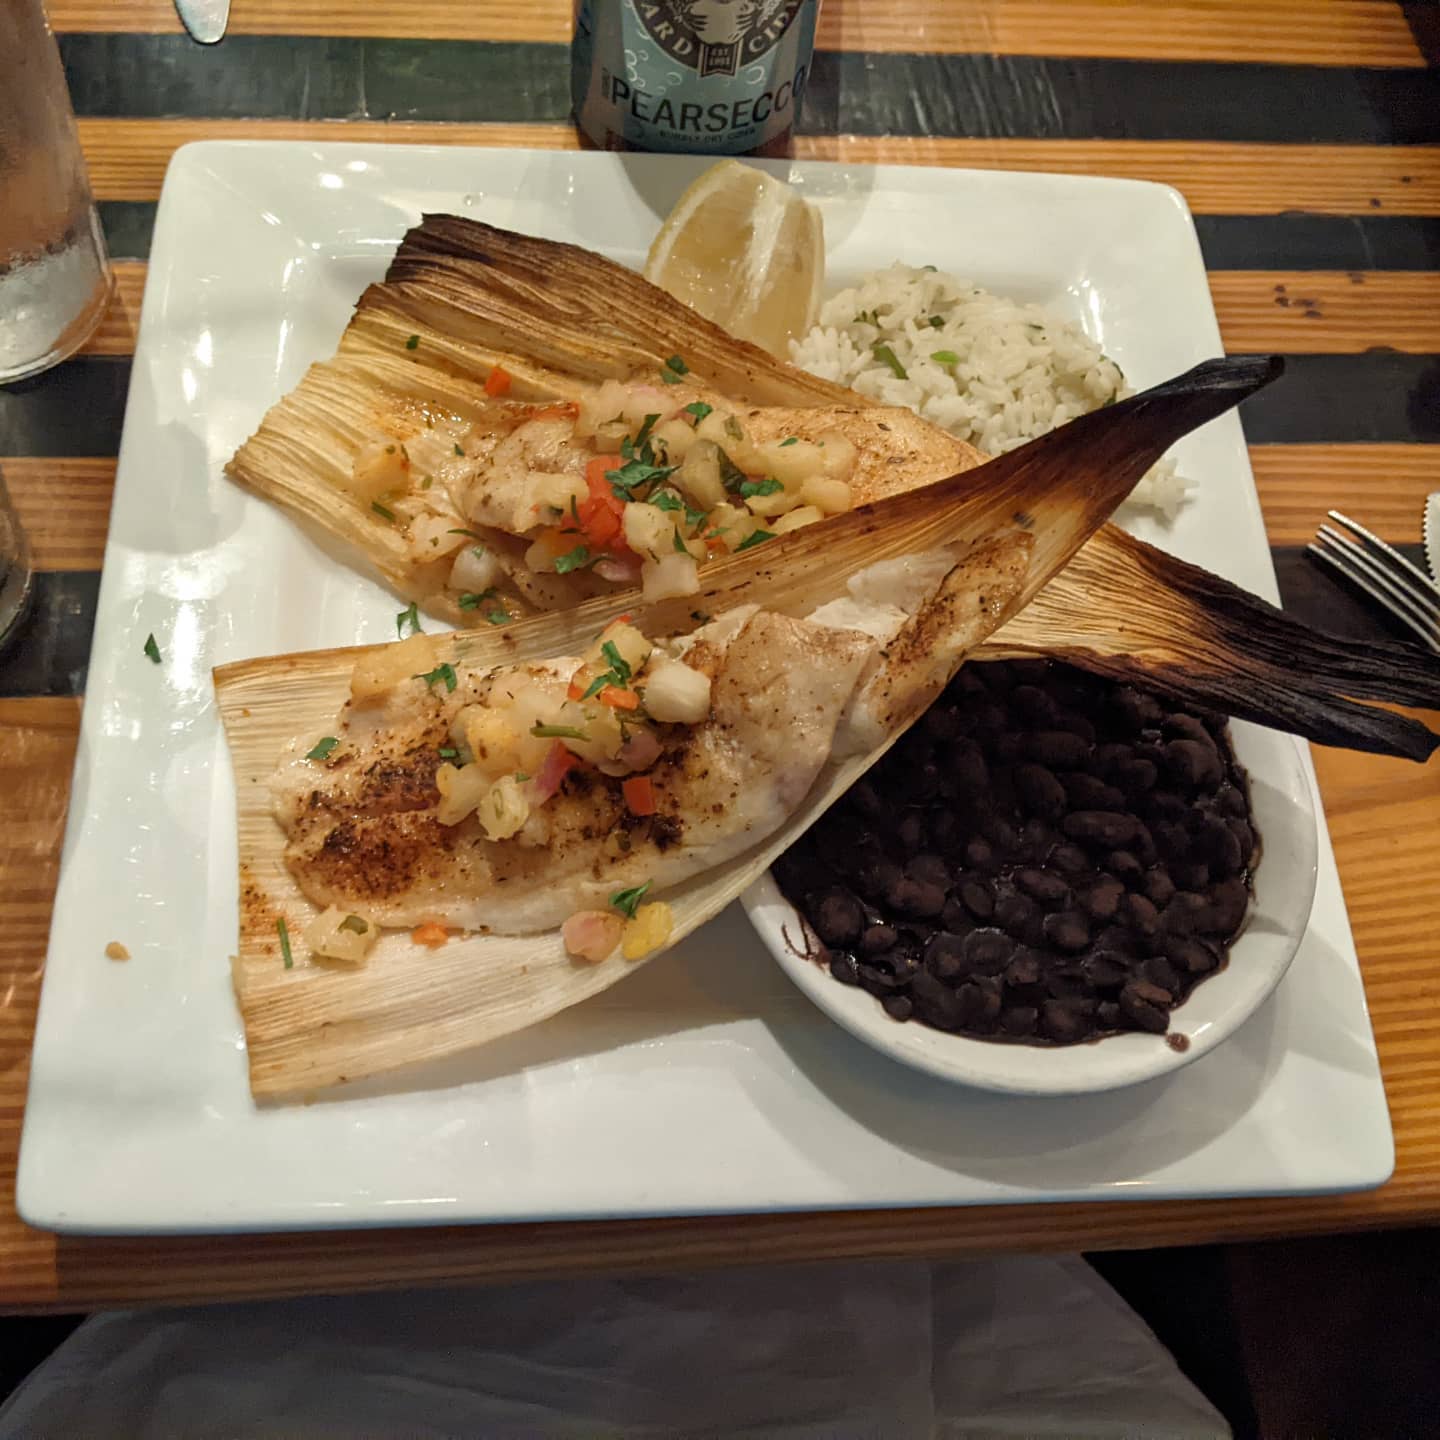 I couldn't resist returning here for more great seafood. This is hogfish blackened in corn husks. Sides are cilantro lime rice and black beans. #foodporn